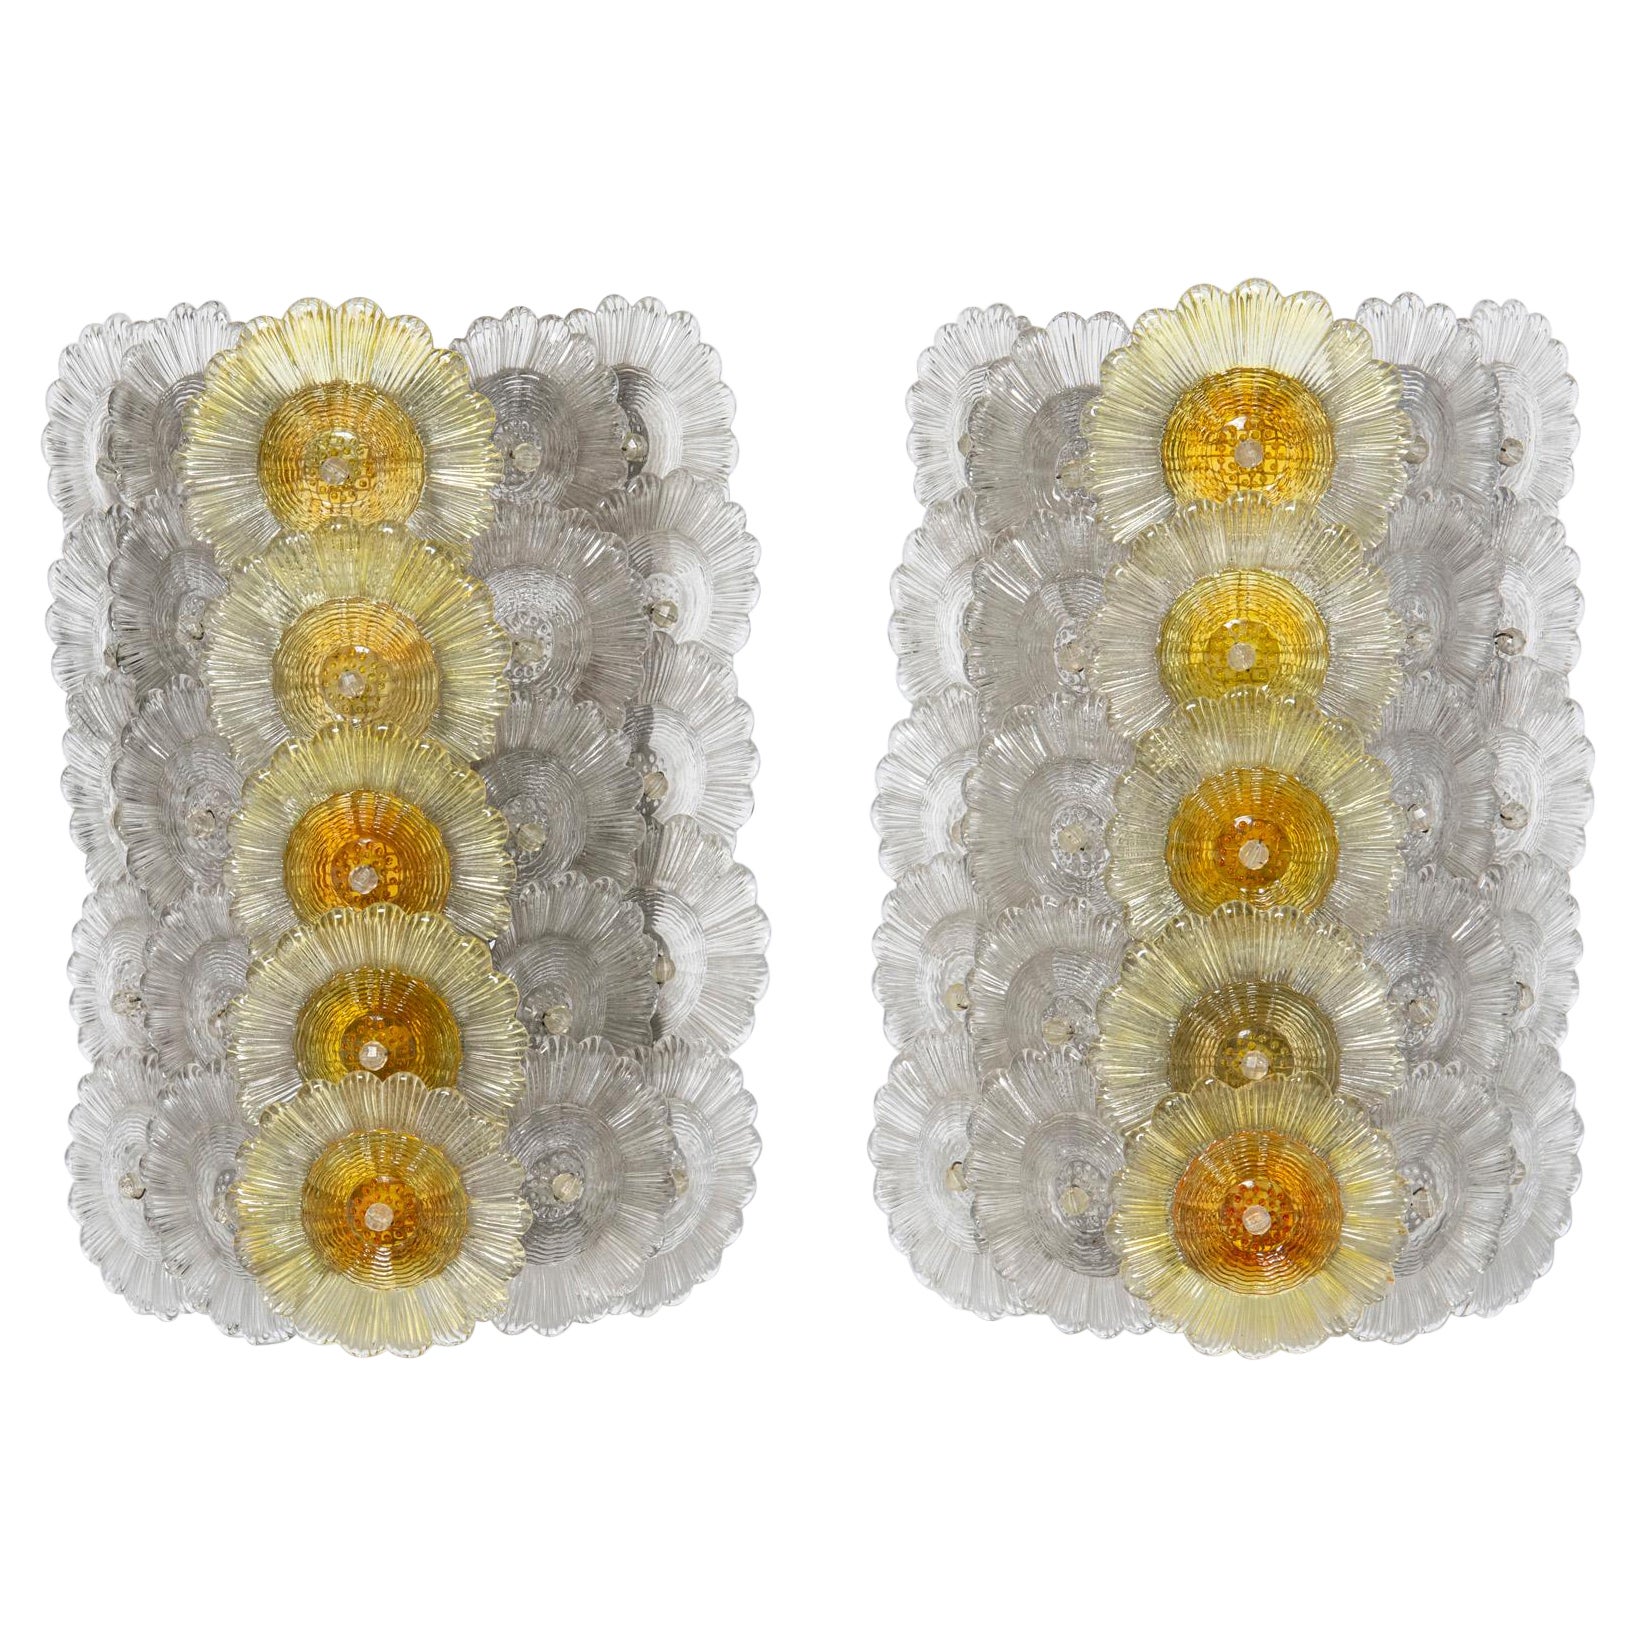 Pair of Murano glass sconces, Italy, circa 1960. For Sale